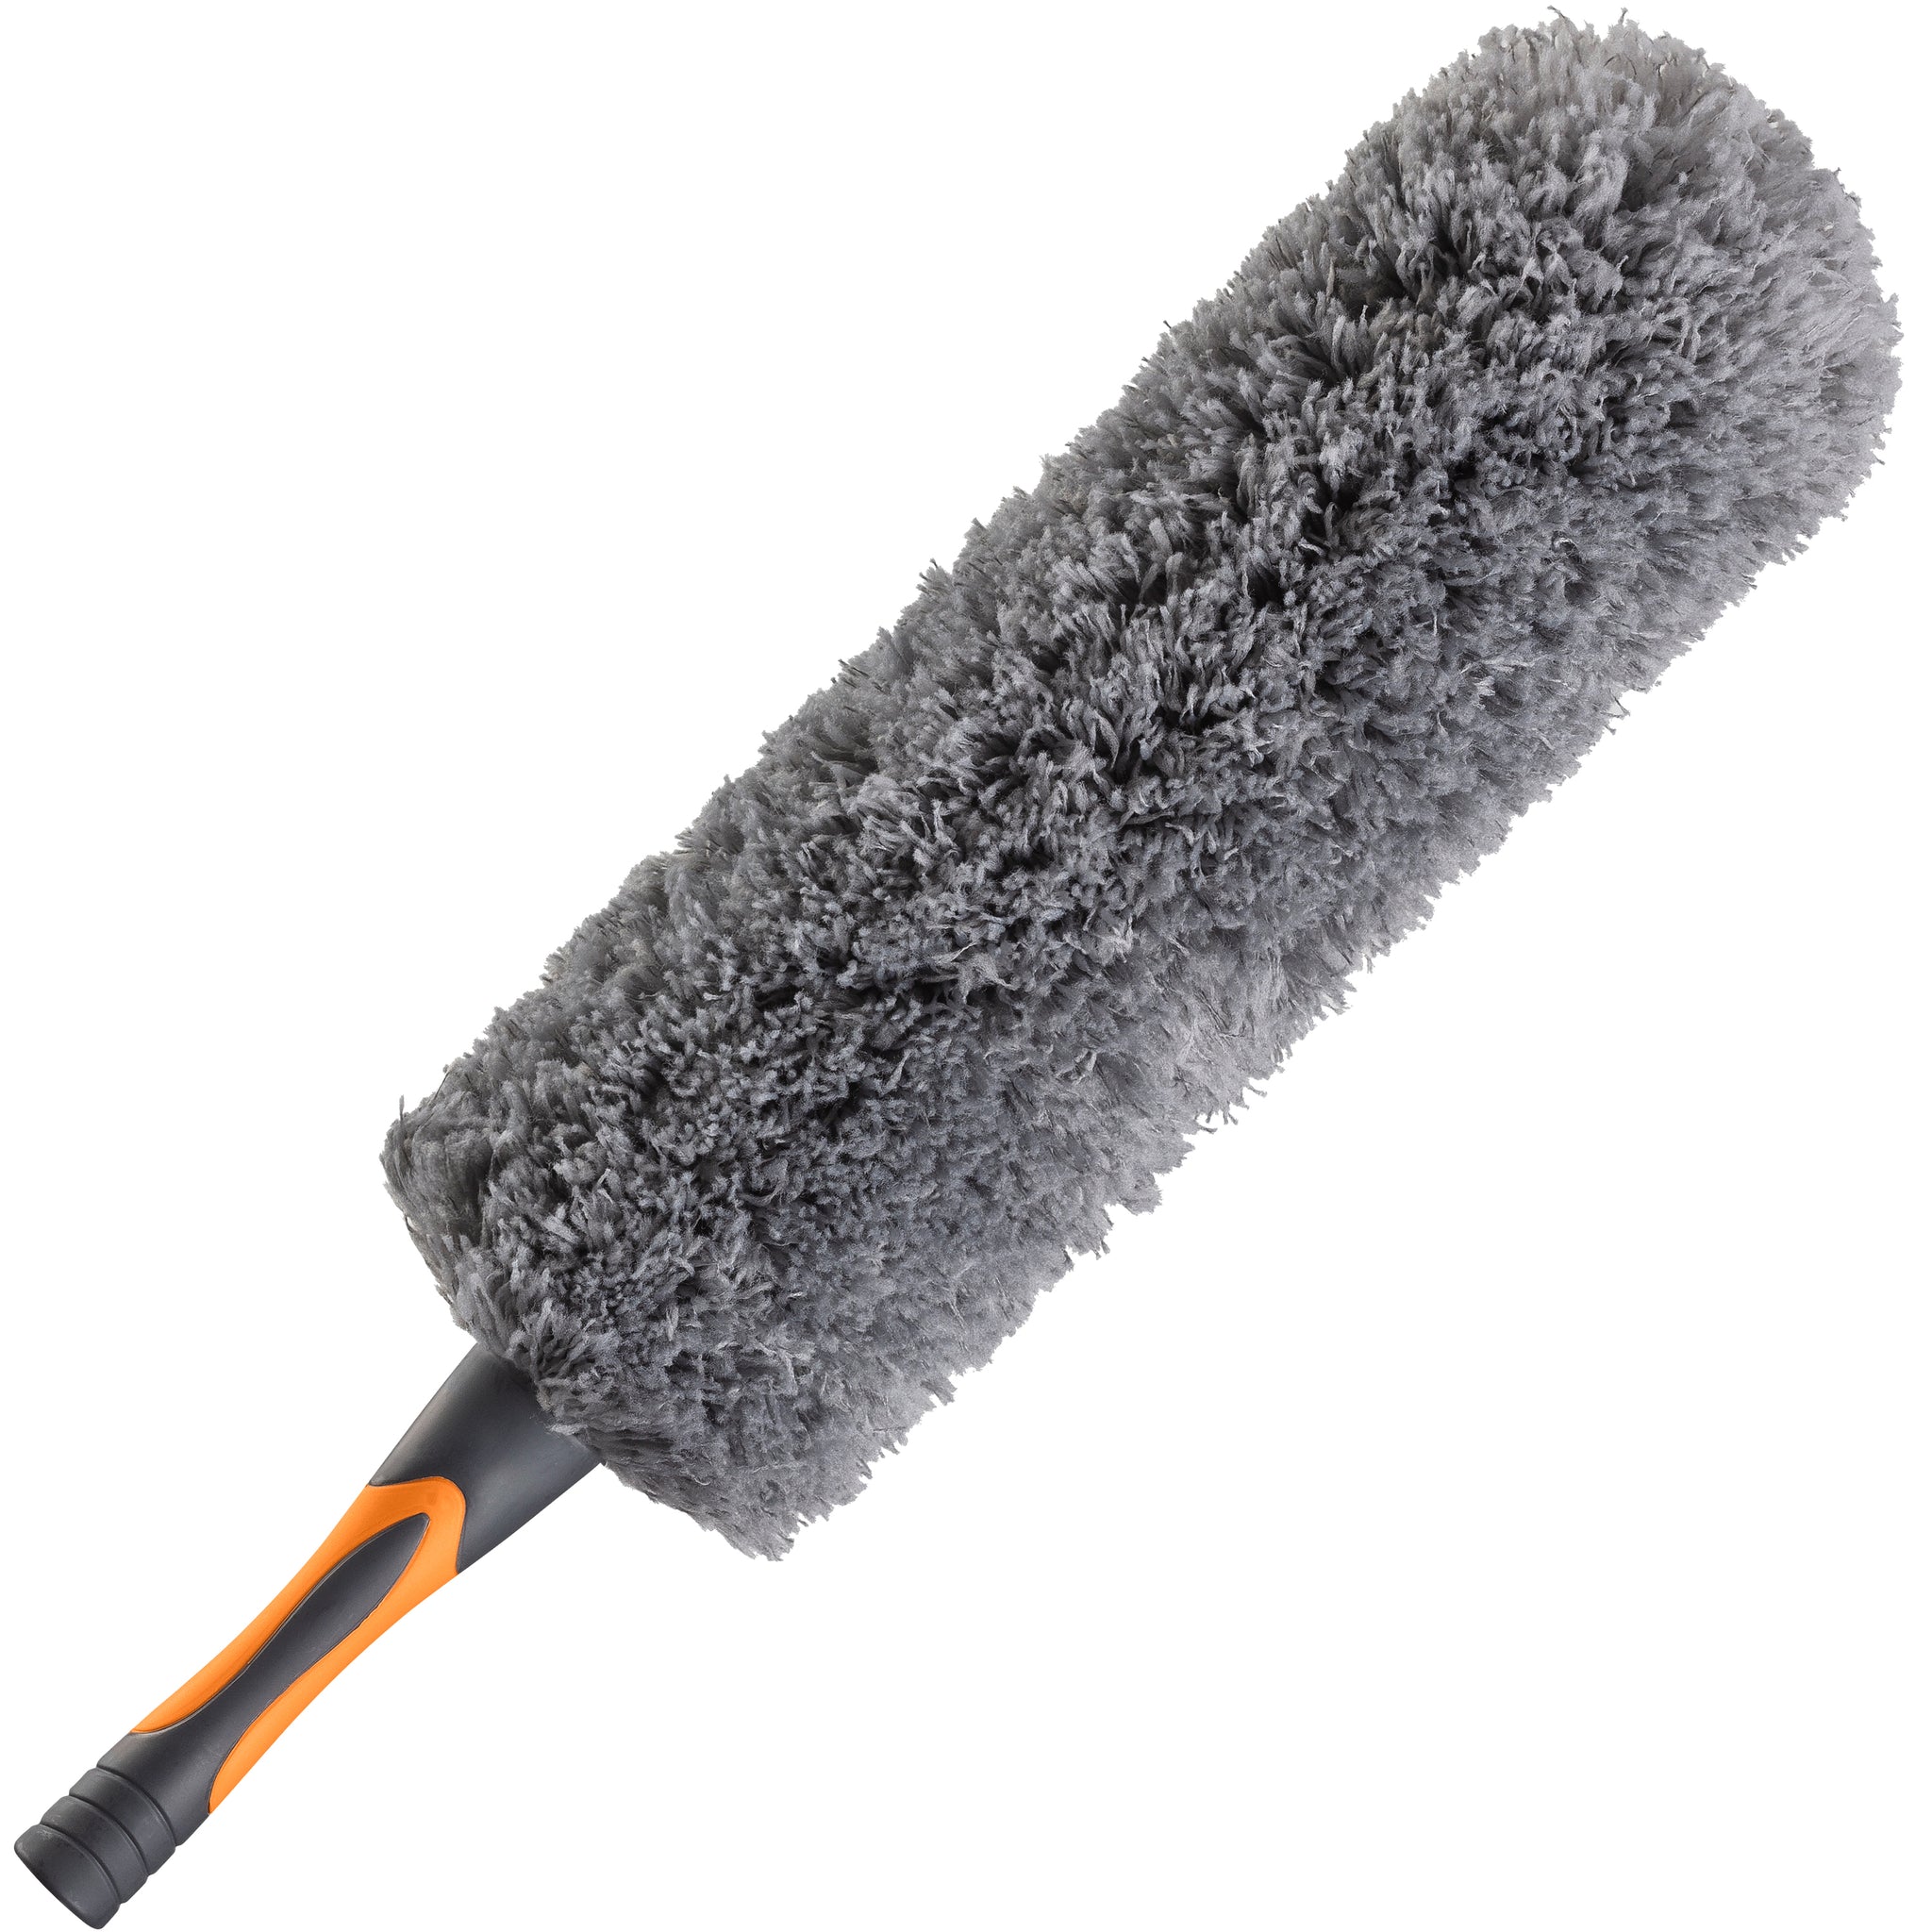 Microfiber Flexible Feather Duster Brush Head with Hand-Grip // Fits All Extension Poles with Standard US Acme Thread (Pole Sold Separately)